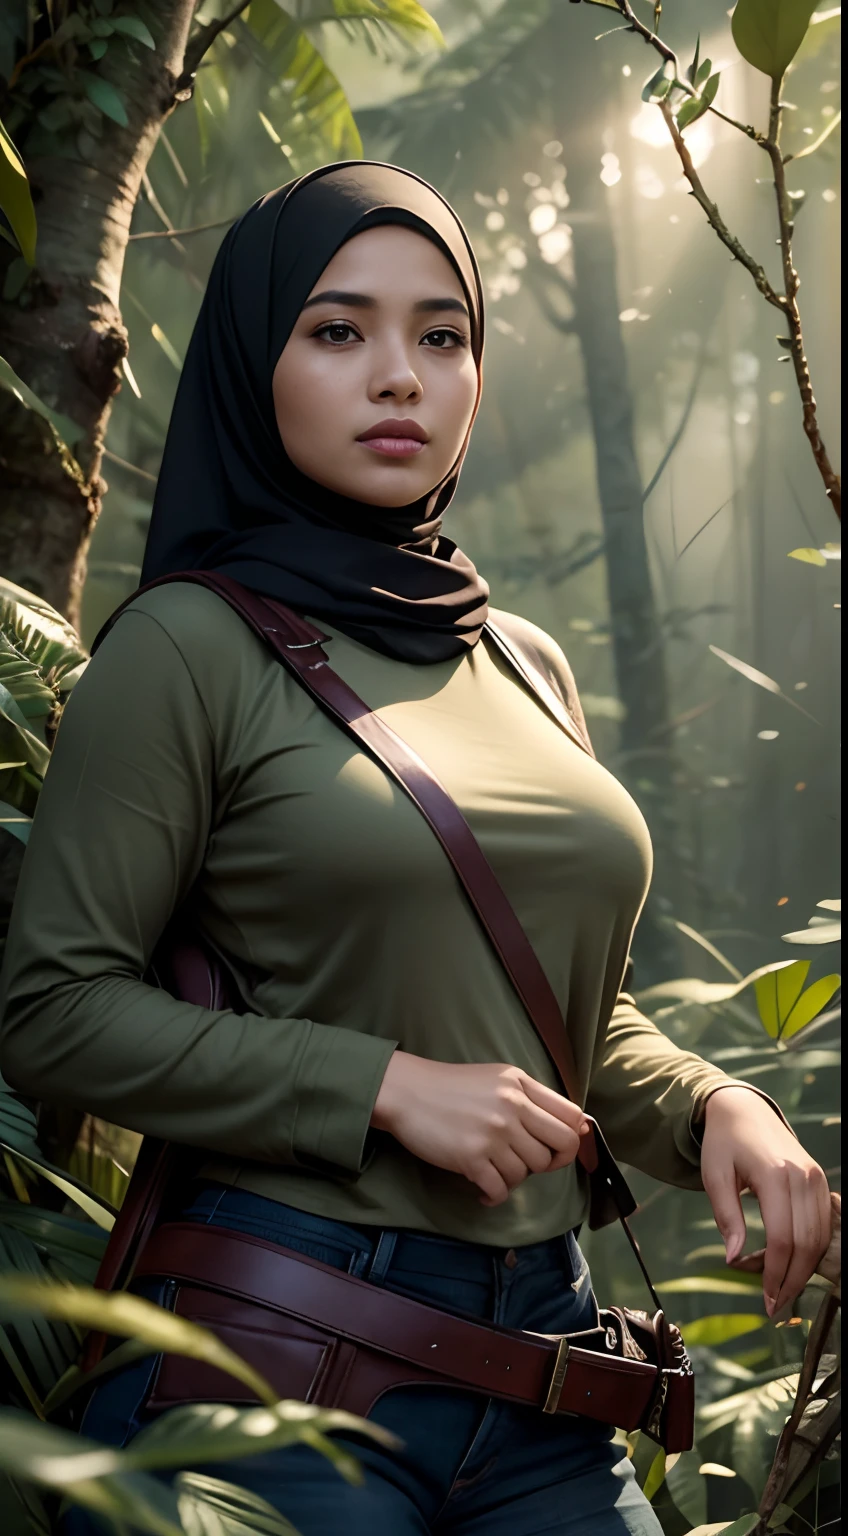 RAW, Best quality, high resolution, masterpiece: 1.3), beautiful Malay woman in hijab (iu:0.8),Best quality, high resolution, Masterpiece: 1.3, Beautiful  hijabi malay girl, Masterpiece, Soft smile, Realistic, 1girl, charming eyes, glowing eyes,parted lips, big breast, Beautiful adult woman in hijap, full-length, beautiful figure, aesthetics of the female body, savage from the islands, hunter of mysterious creatures, observing the creature, in ambush, studying the creature found, in ranger clothes, with a large backpack, detailed clothes, many pockets, many belts, everything is hung with gadgets, catches small mysterious creatures, hunts small creatures, mysterious forest, beautiful forest, nature surrounded by flowers,  tender leaves and branches surrounded by fireflies (natural elements), (jungle theme), (leaves), (branches), (fireflies), (particle effects), etc.3D Octane rendering, ray tracing, super detailing viewer, closeup